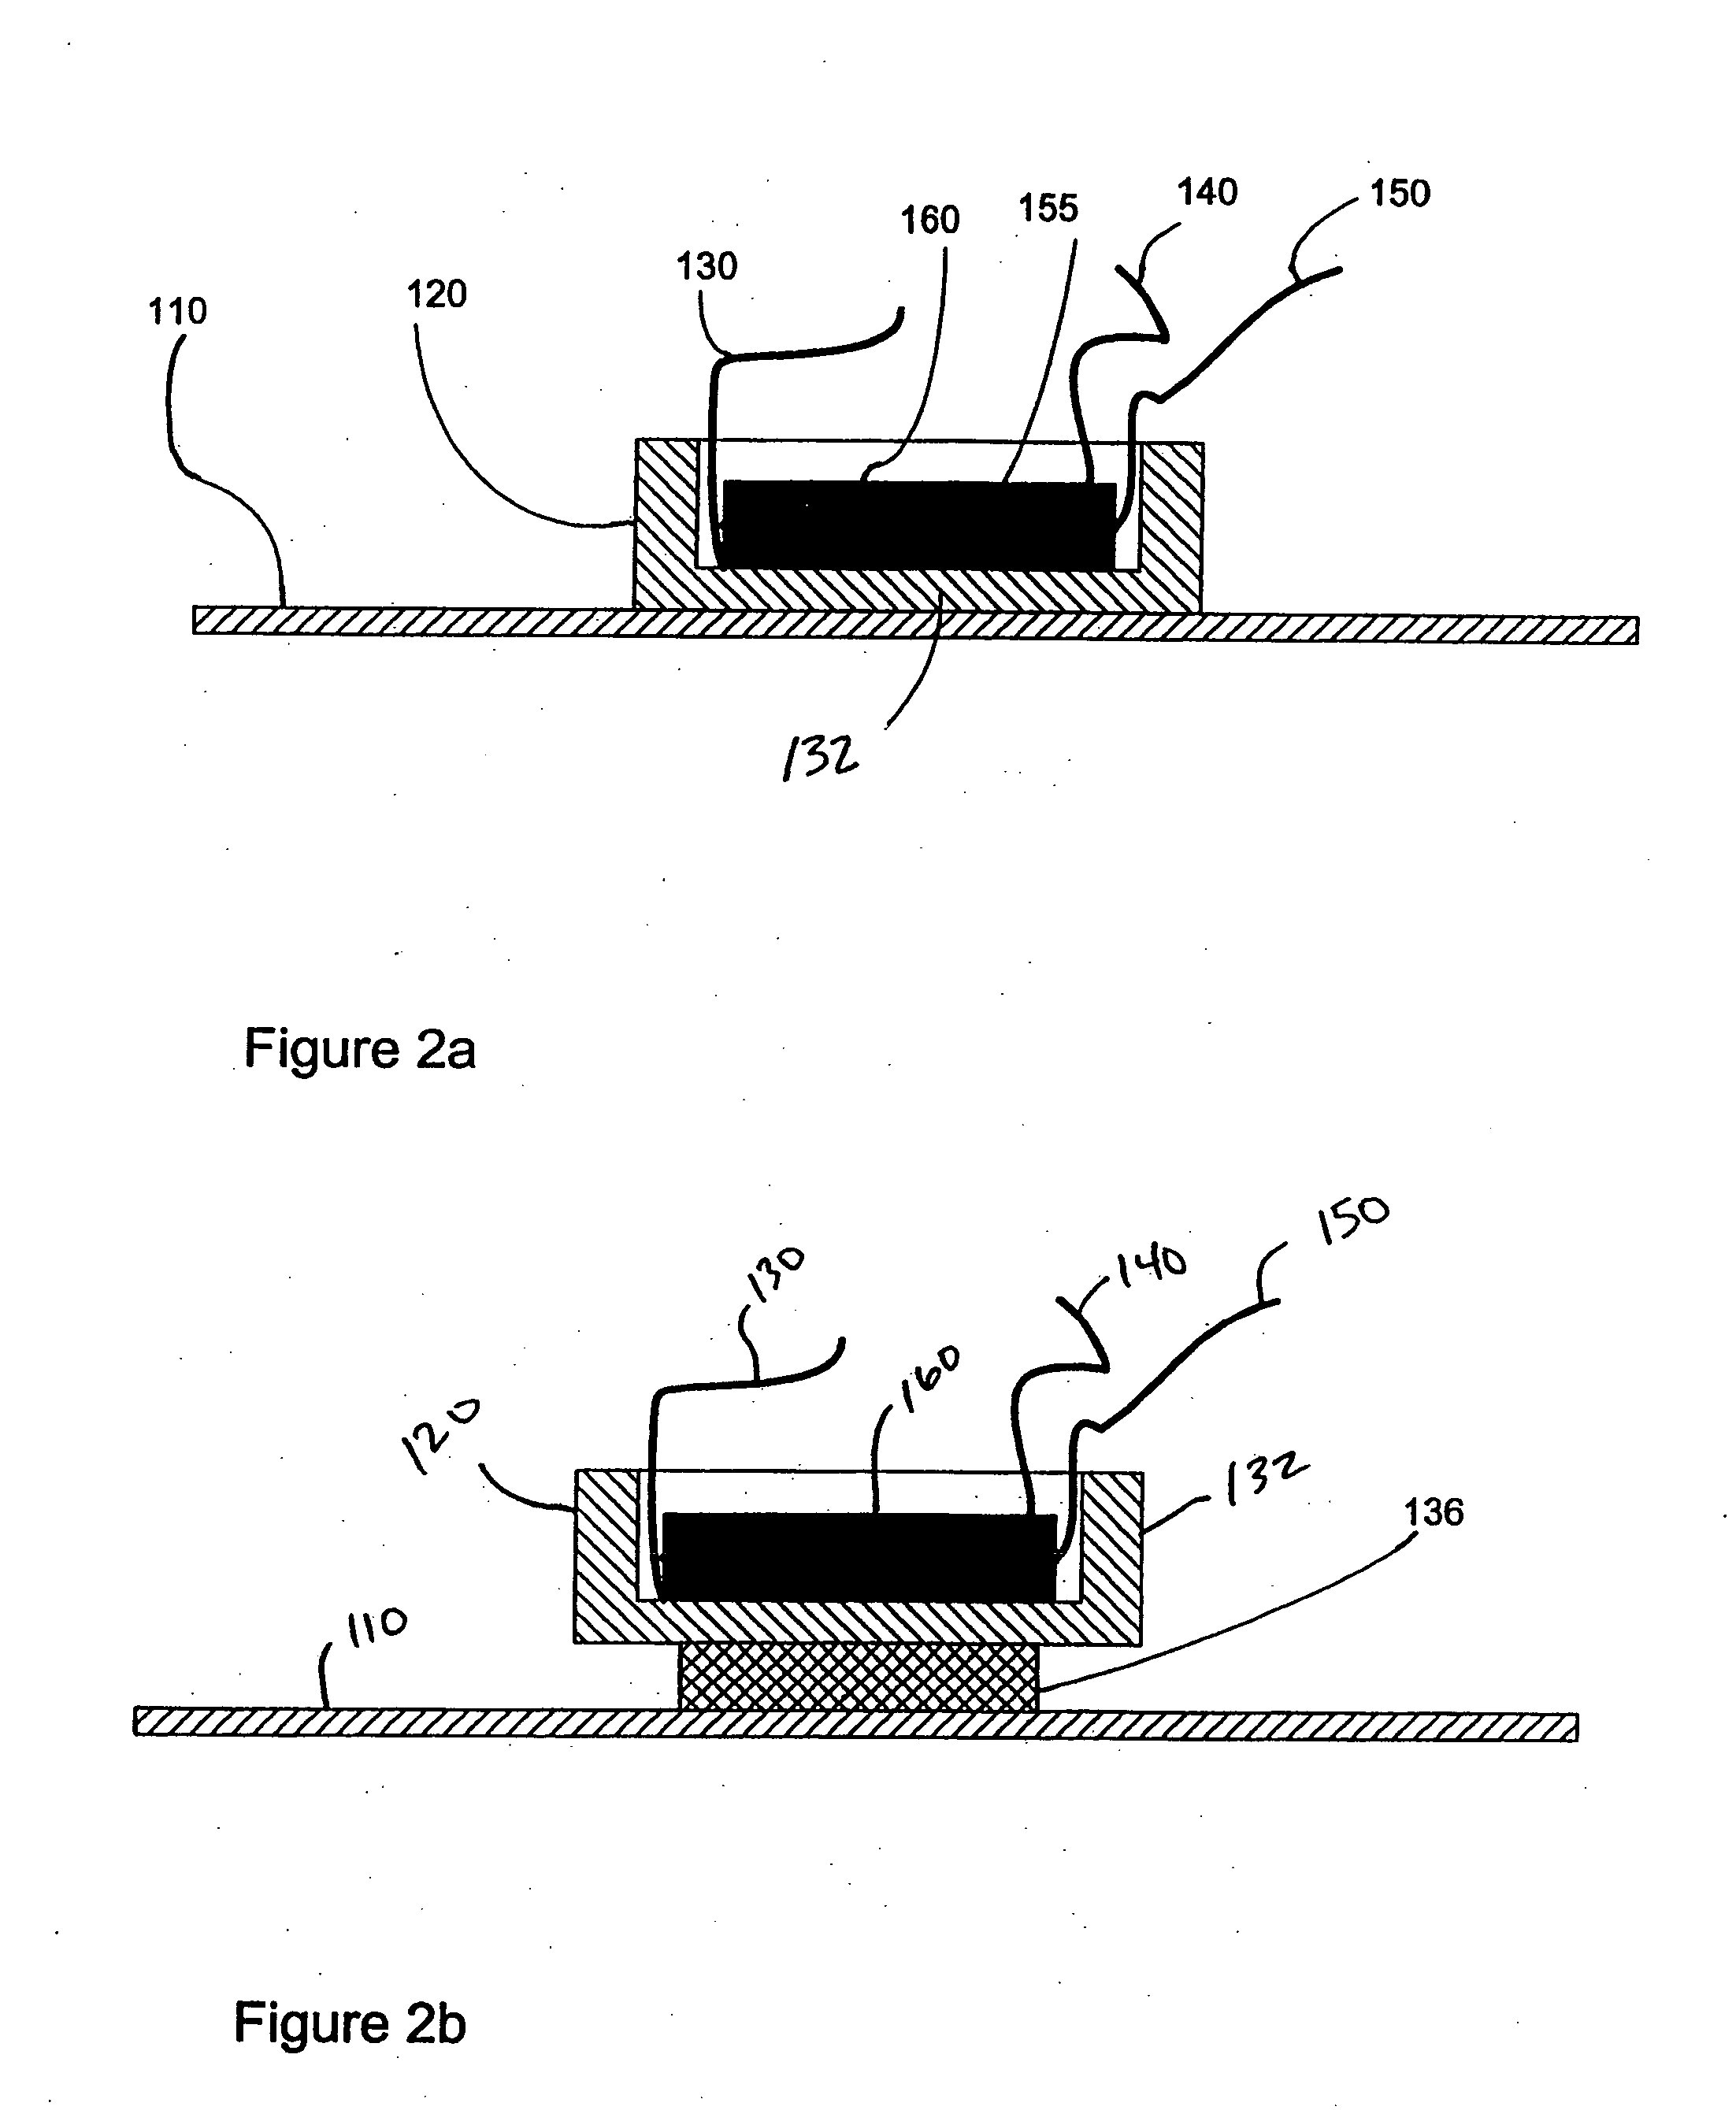 Implantable medical device with integrated acoustic